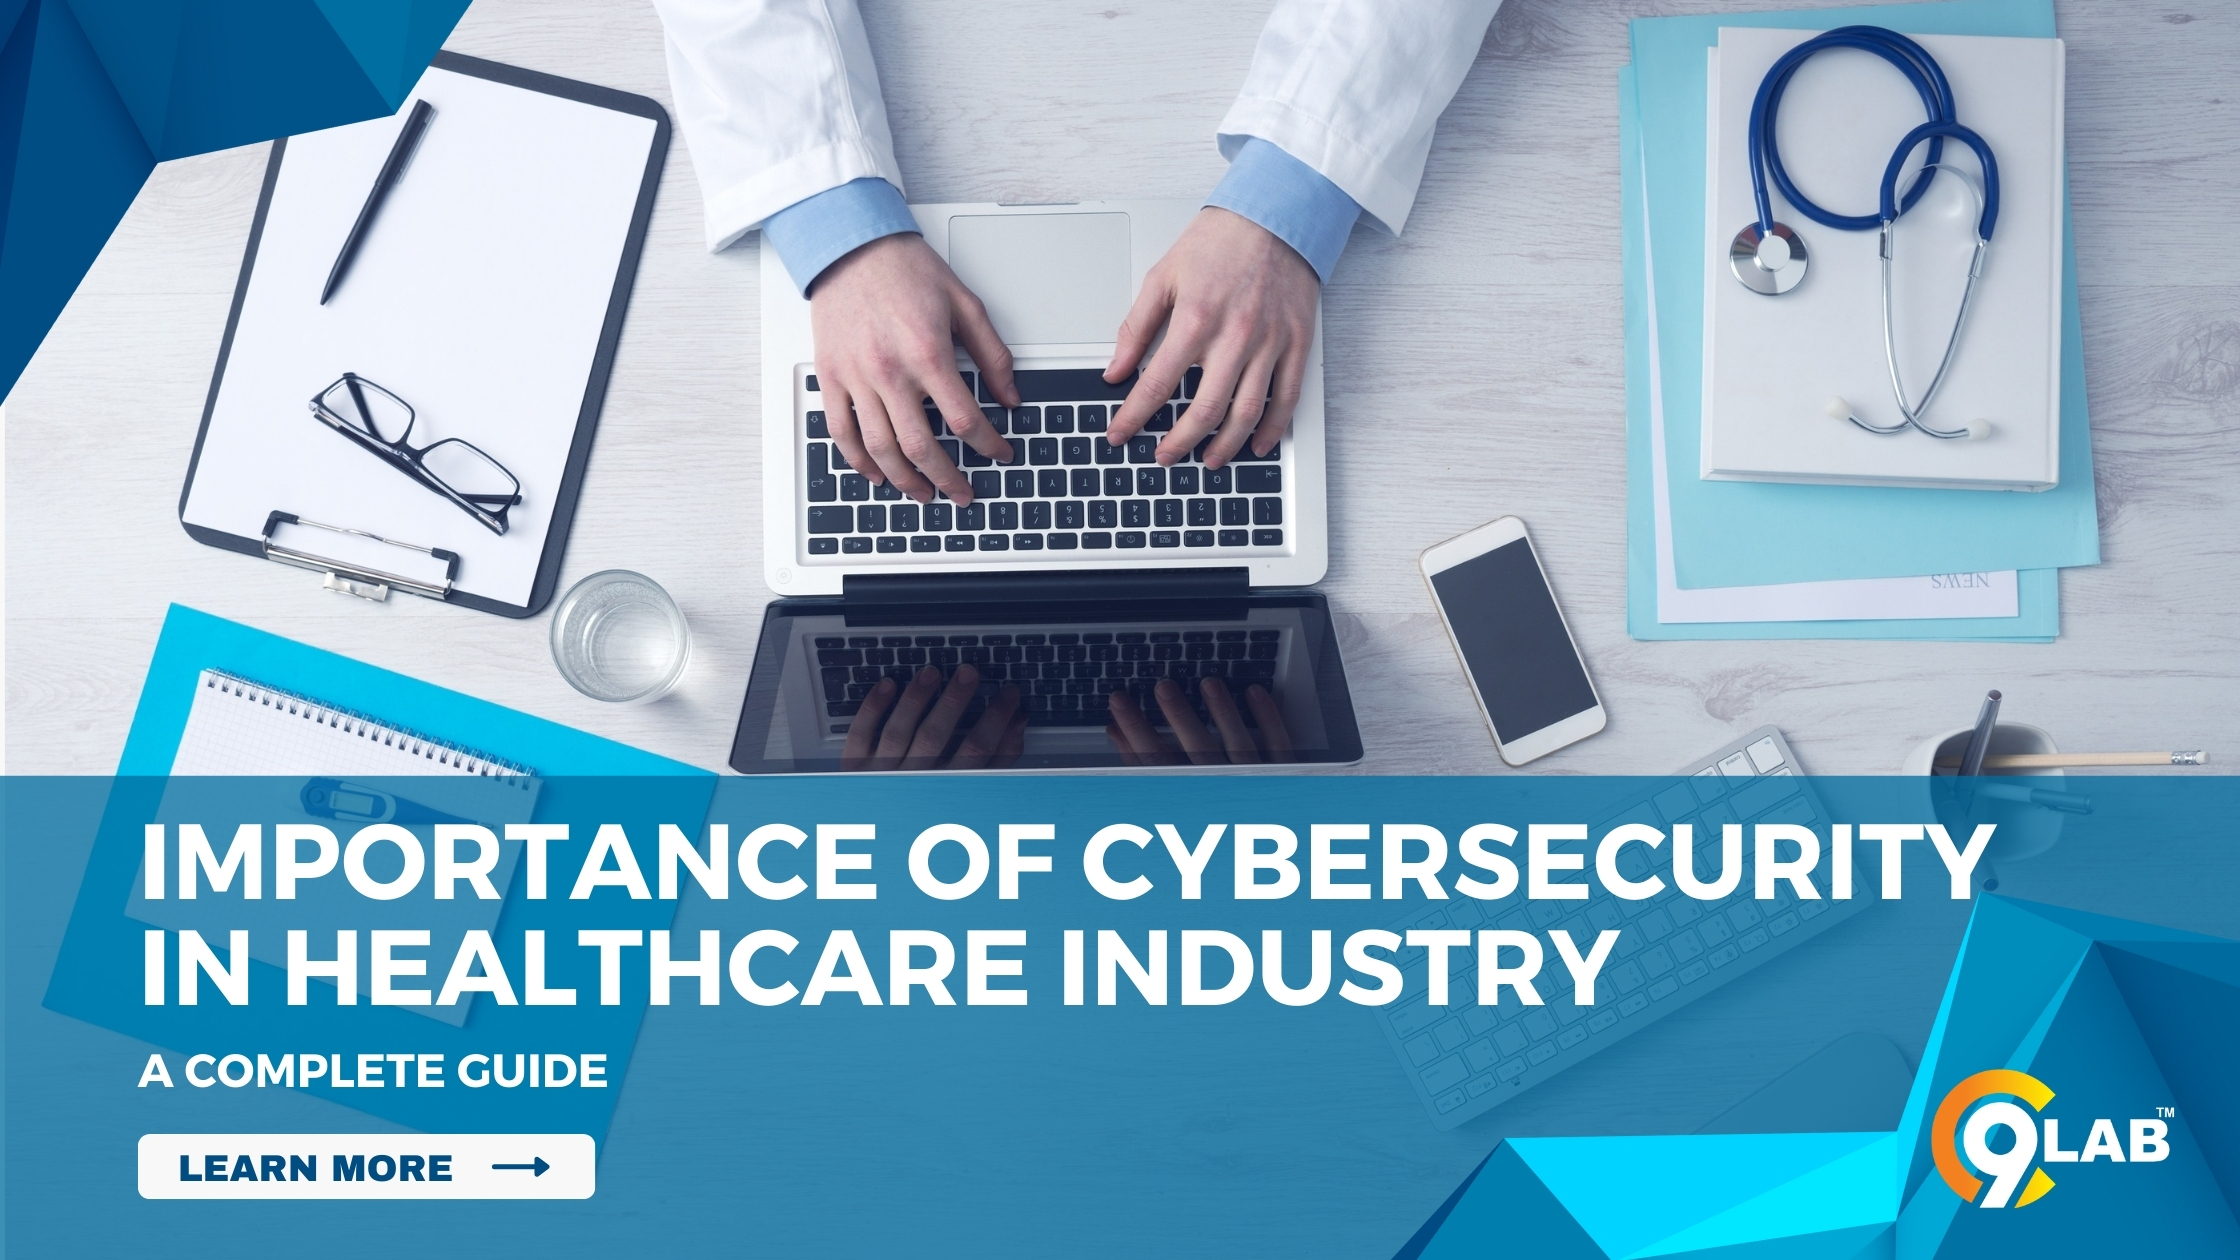 The Importance of Cybersecurity in the Healthcare Industry: A Complete Guide